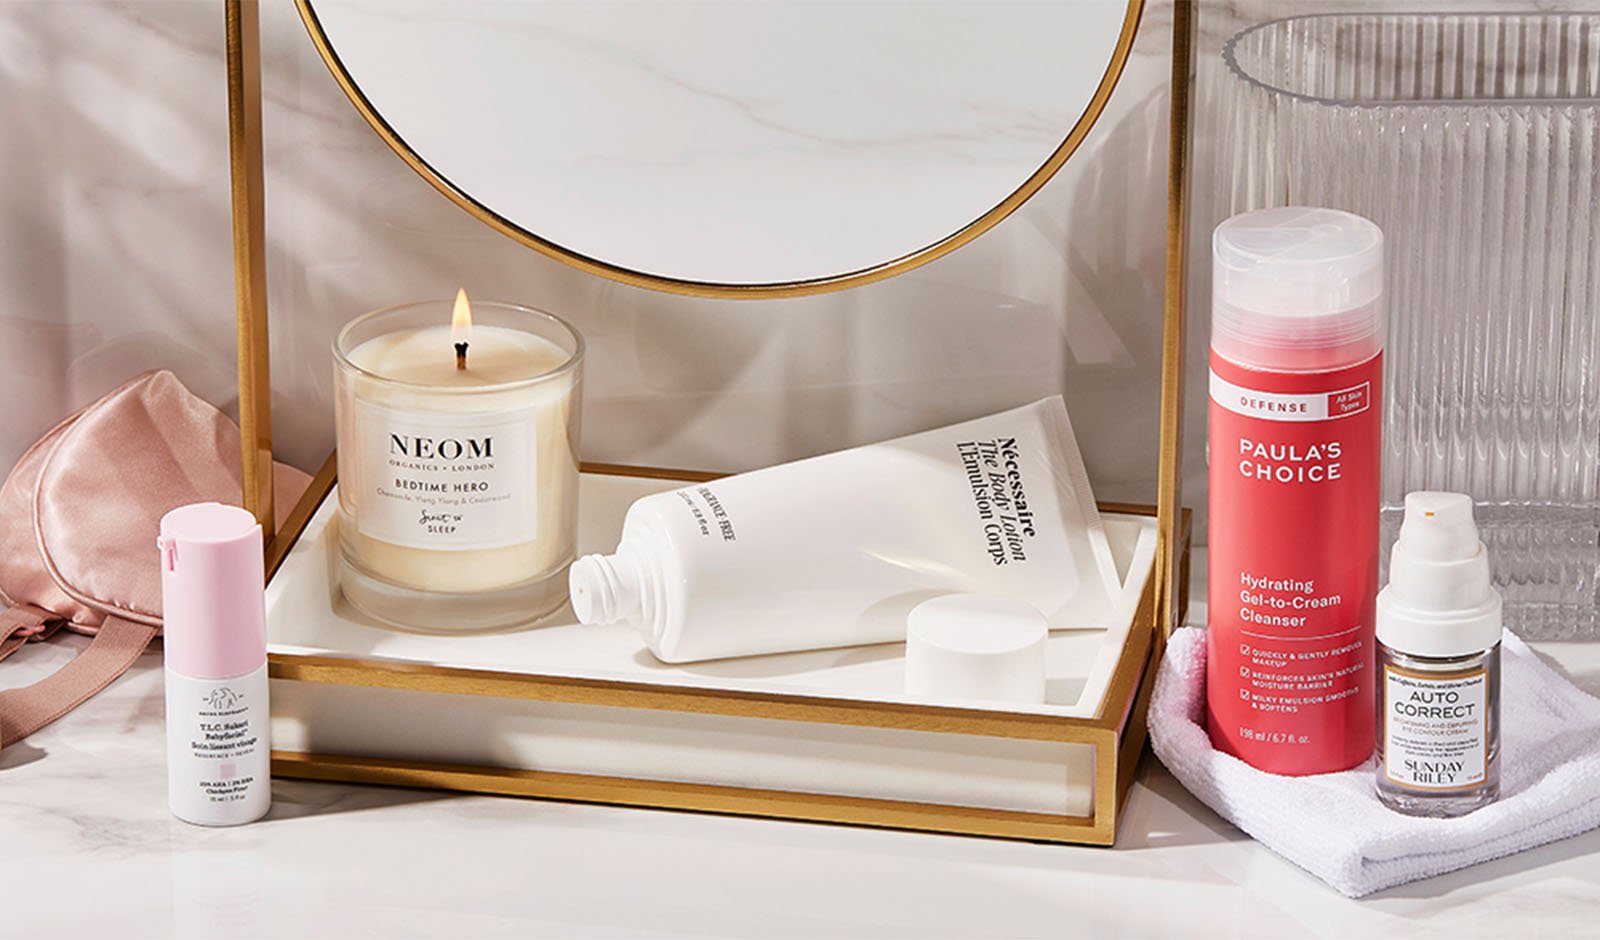 Shop luxury beauty and wellness today at Space NK